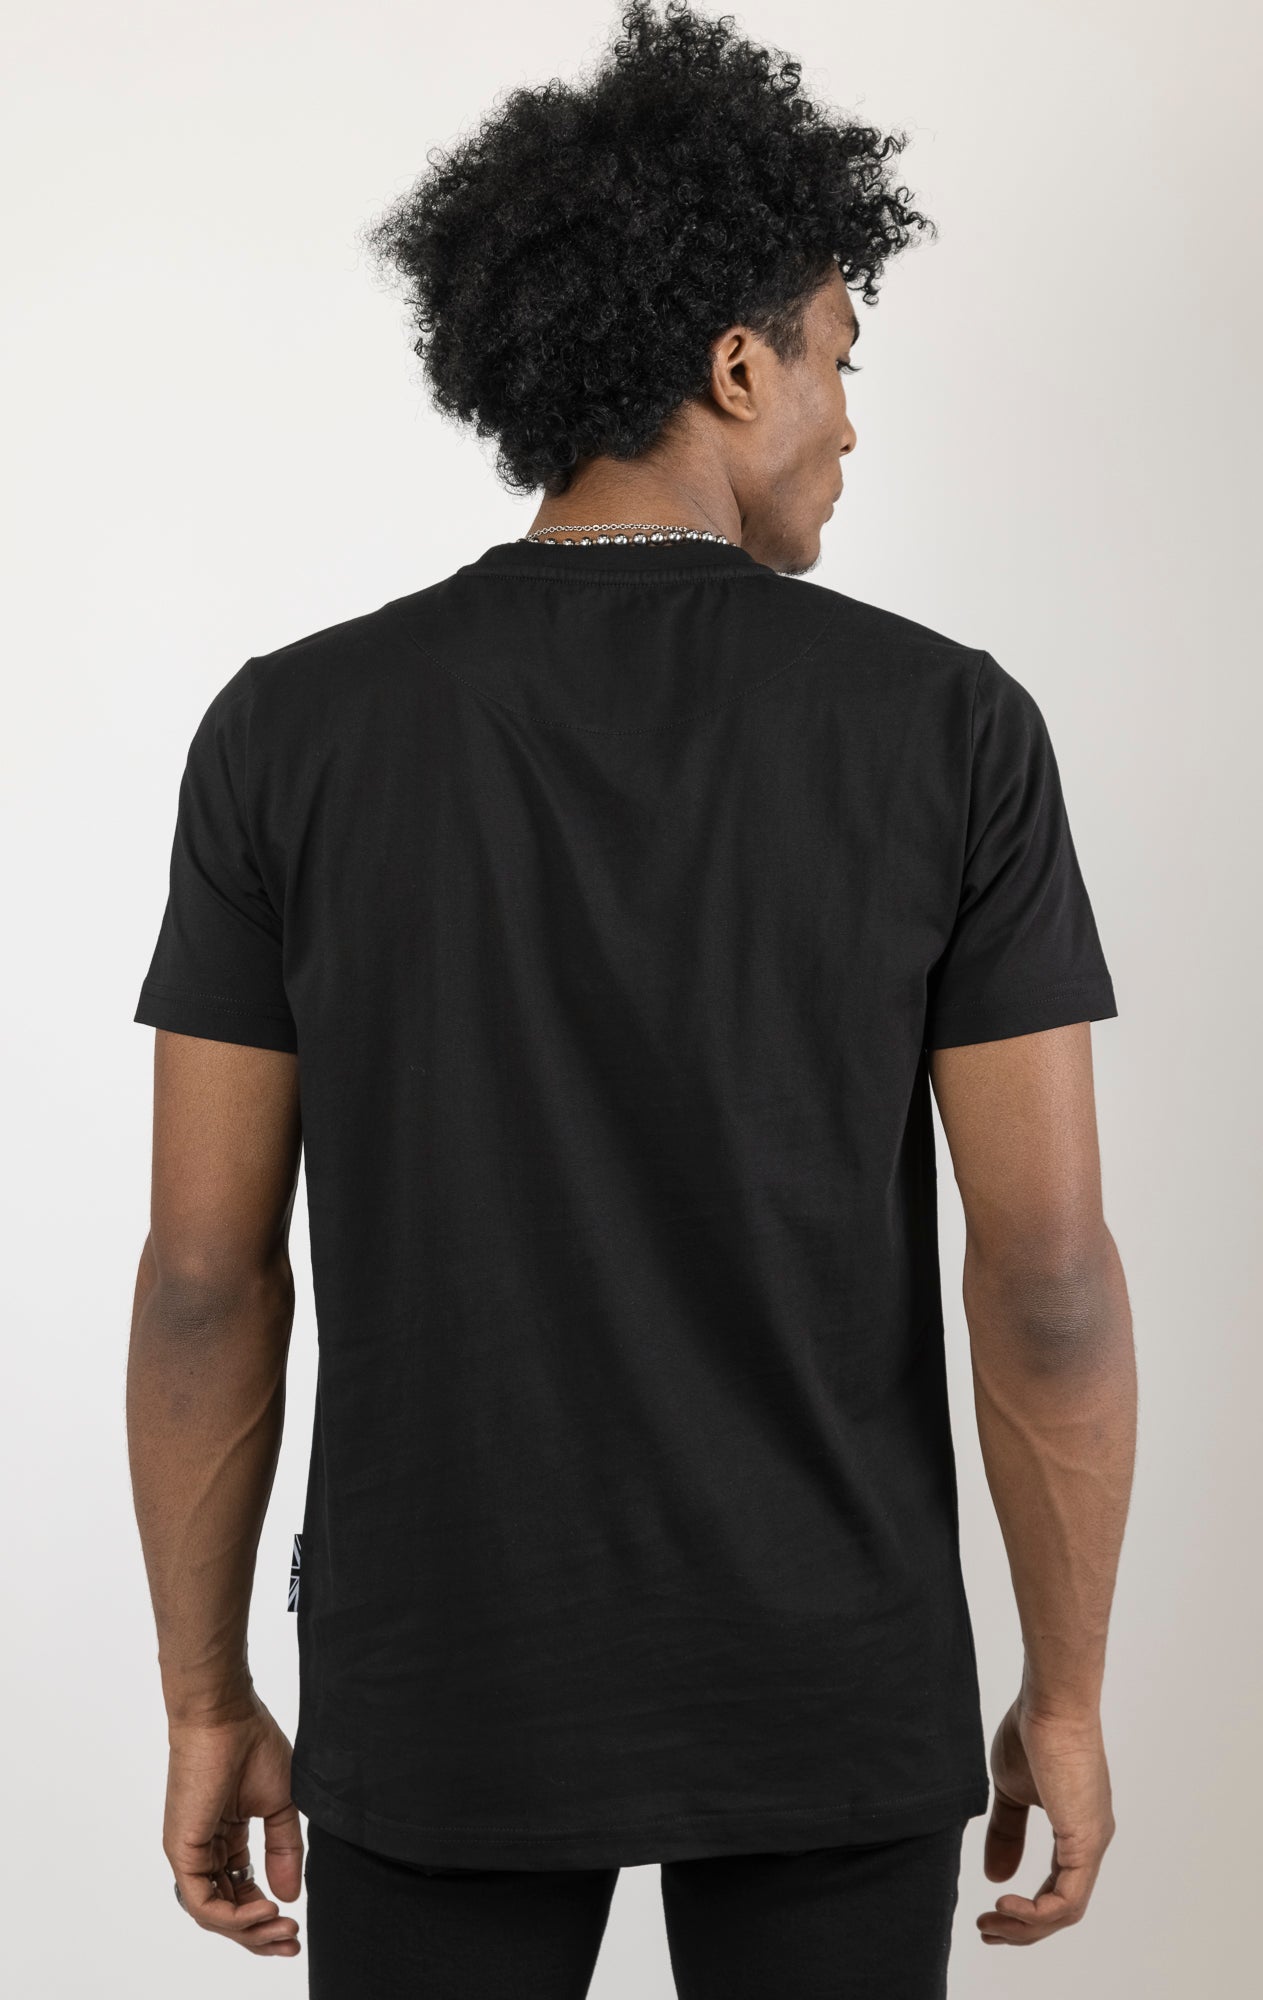 Men's regular fit t-shirt in a variety of colors. The shirt features a slightly elongated sleeve, a comfortable fit through the shoulders and body, and a 